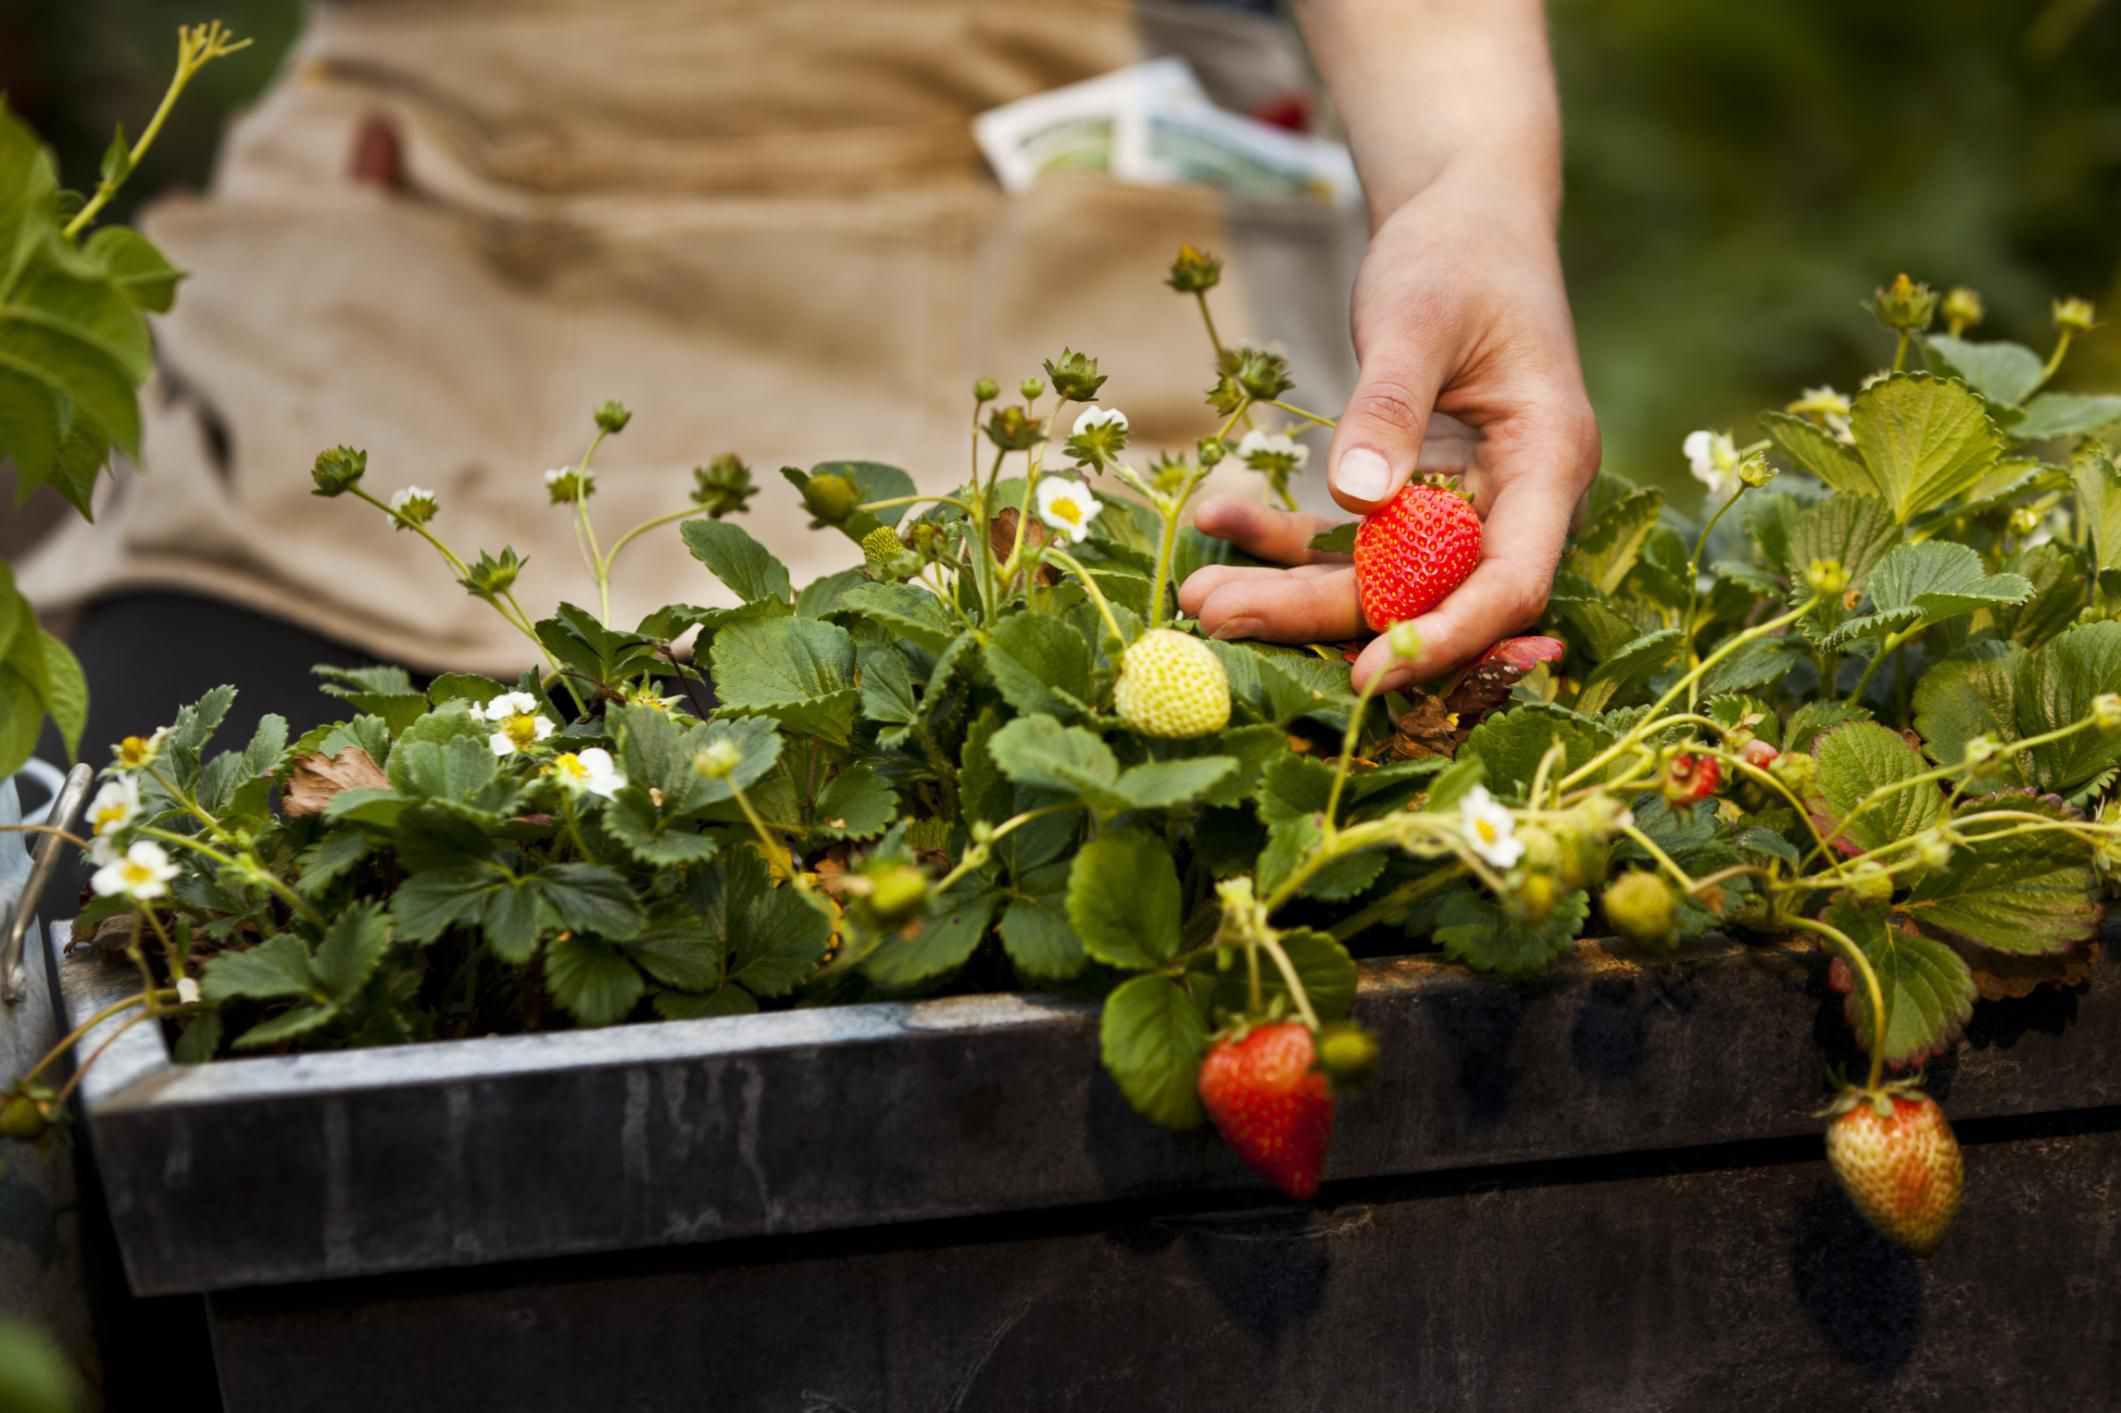 how to grow strawberries at home in a pot